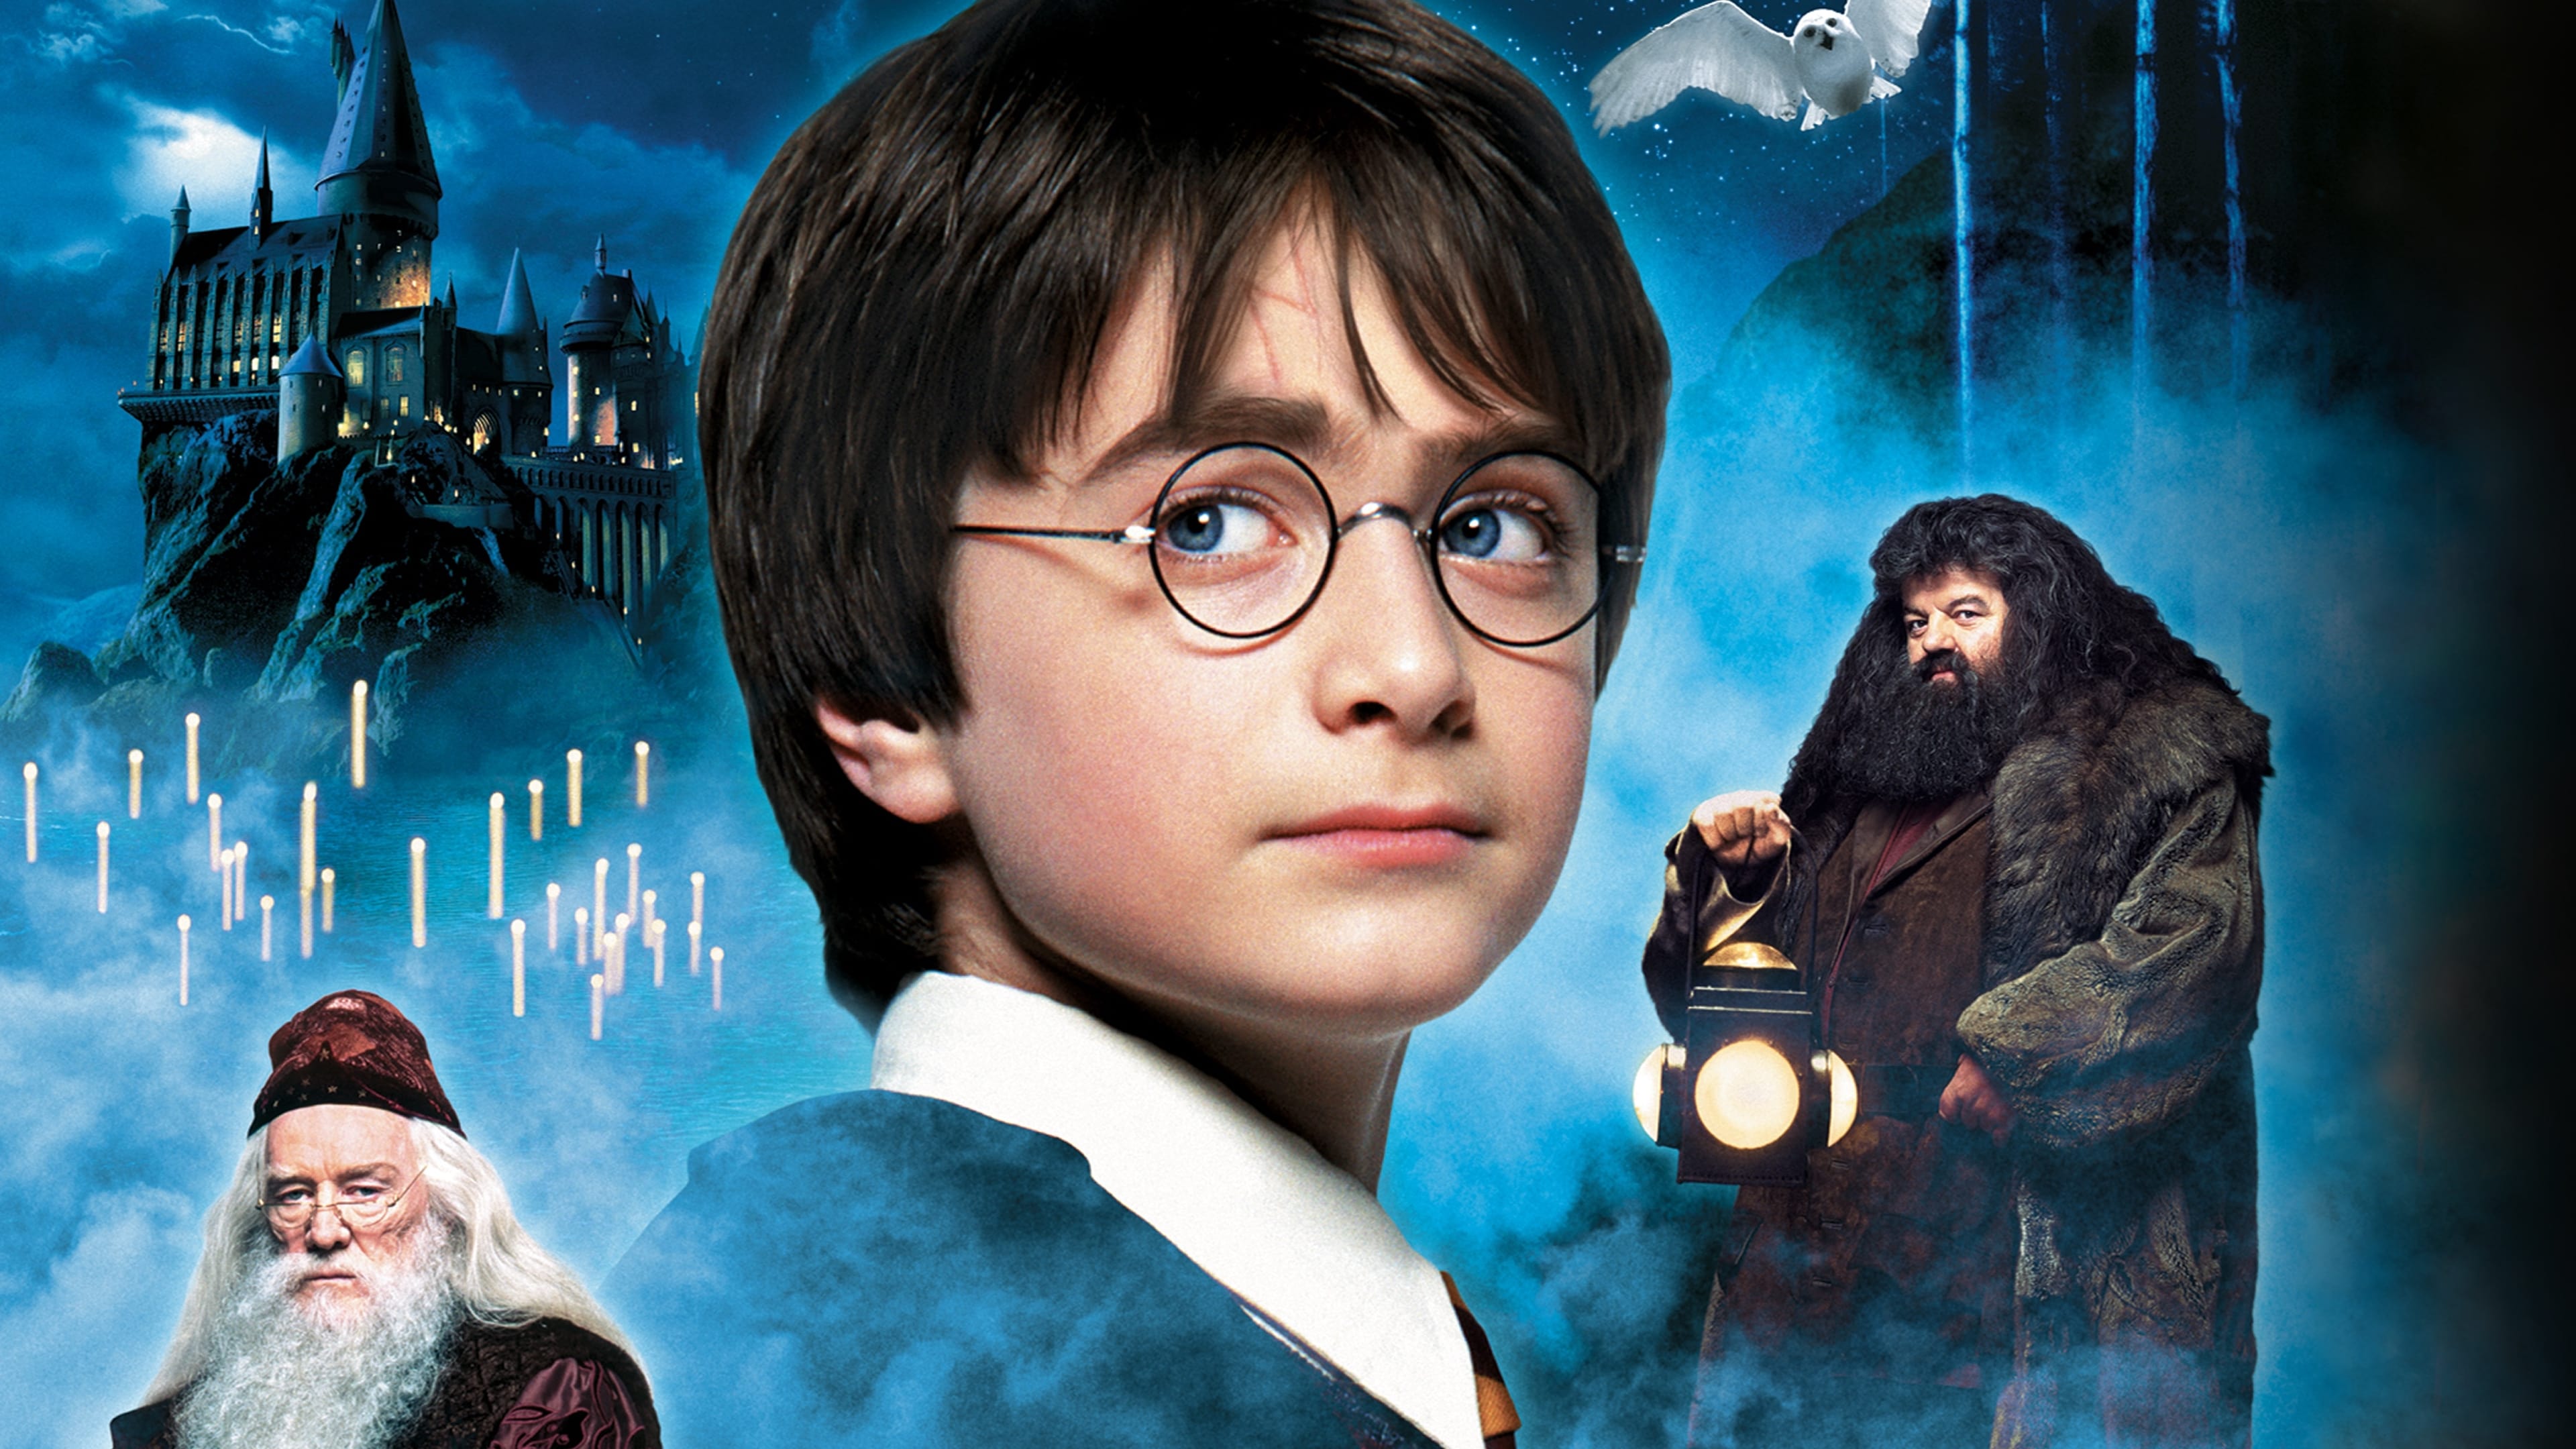 Watch Harry Potter and the Philosopher's Stone (2001) Full Movie Online